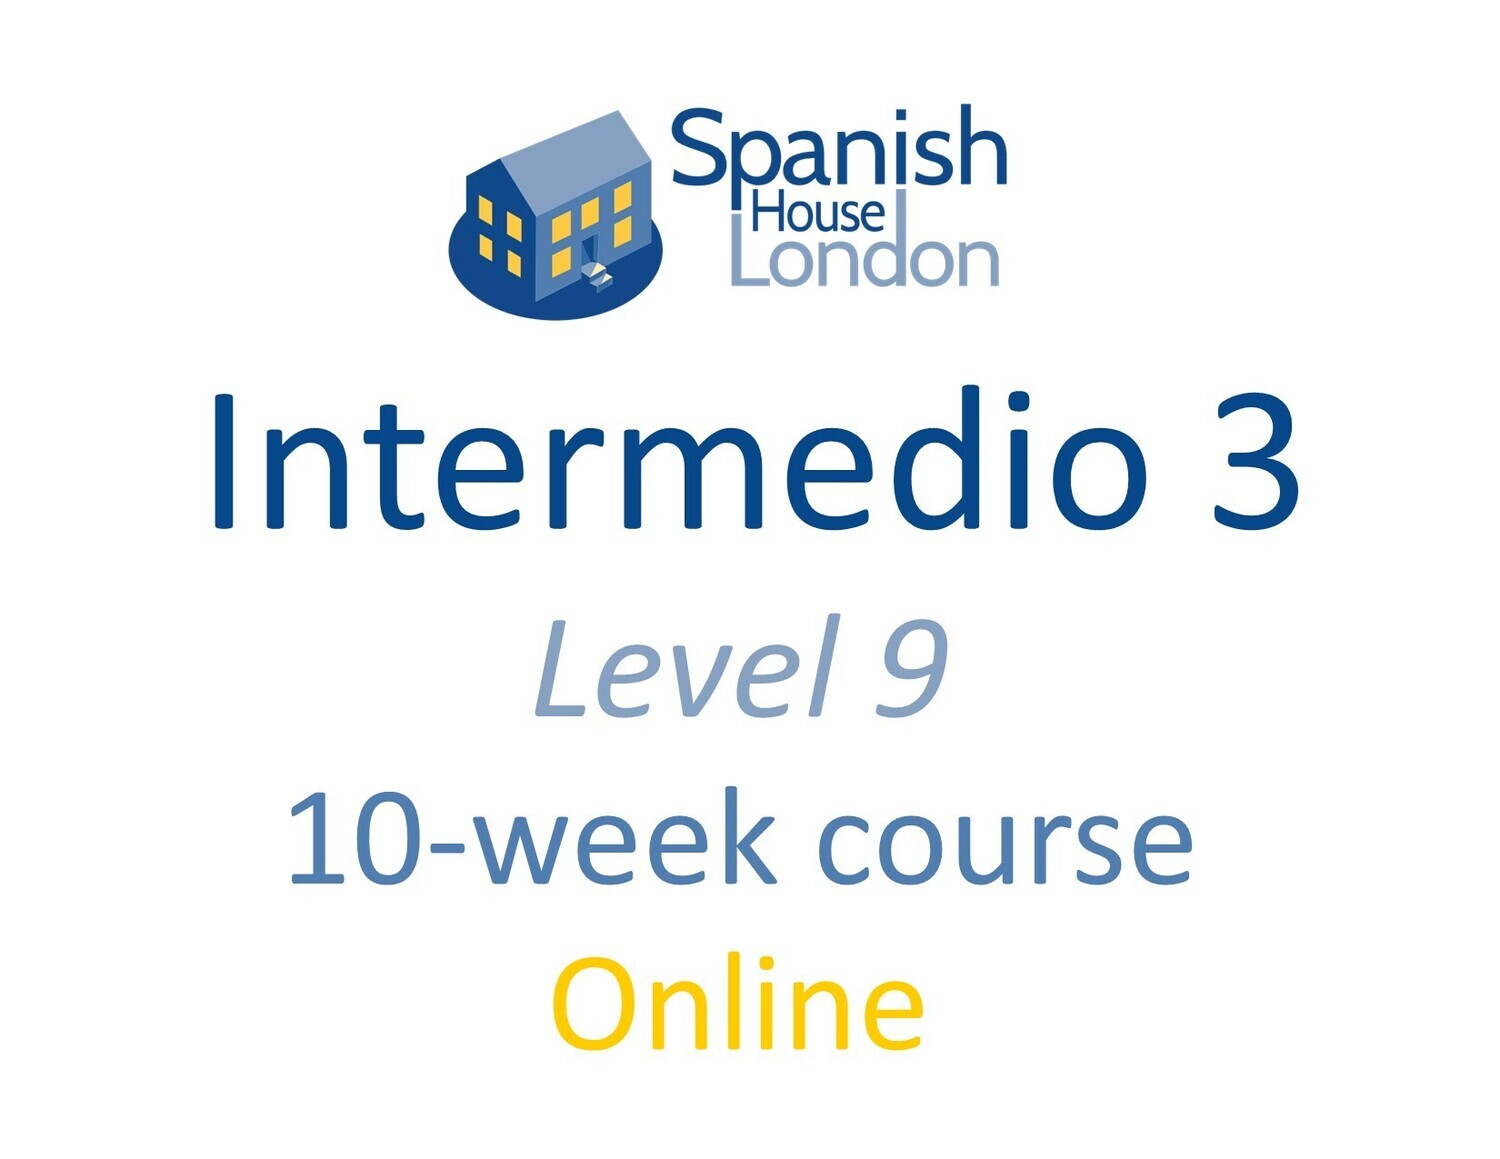 Intermedio 3 Course starting on 30th November at 7.30pm